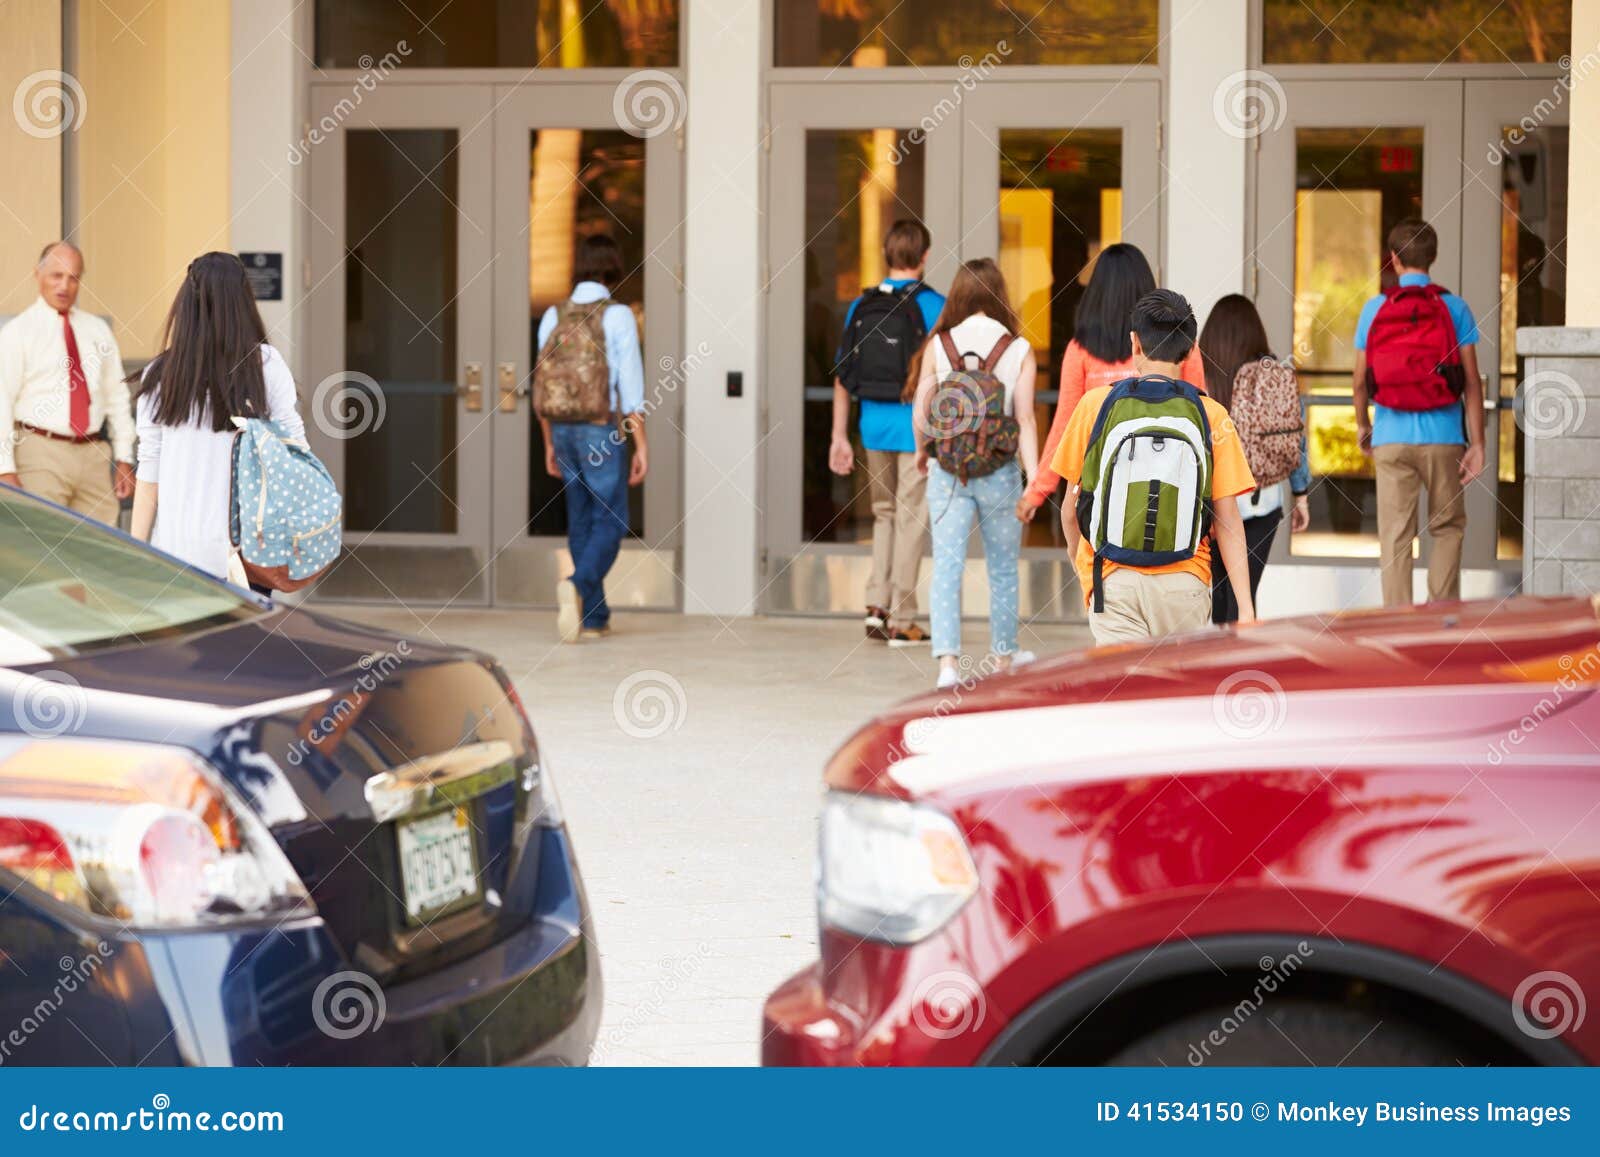 high school students being dropped off at school by parents